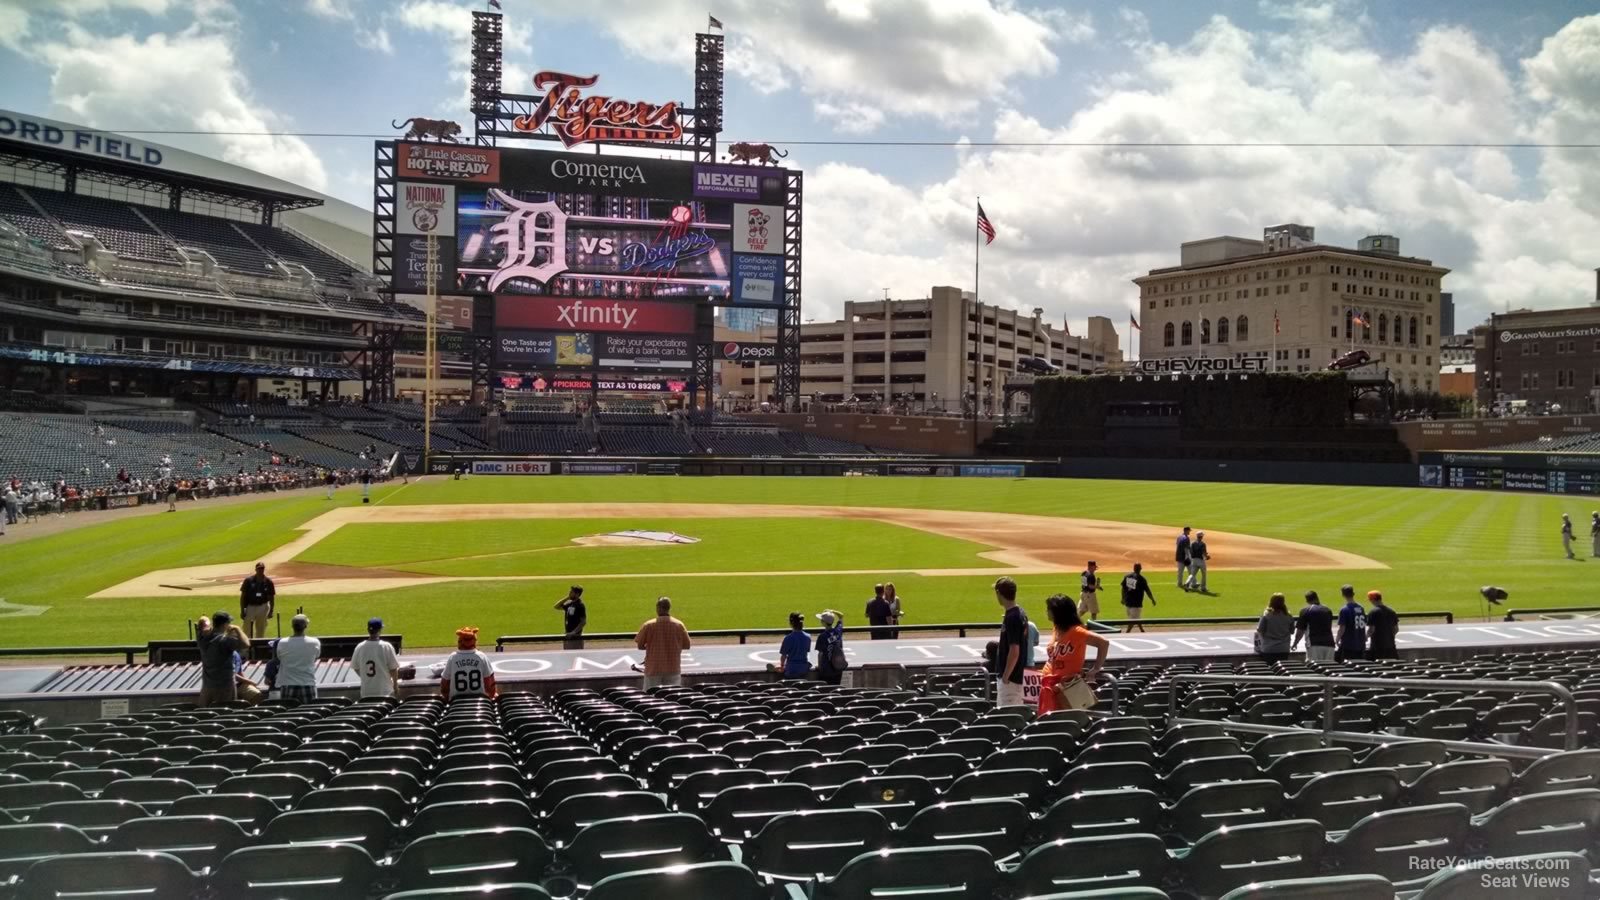 Comerica Park Seating Chart With Rows